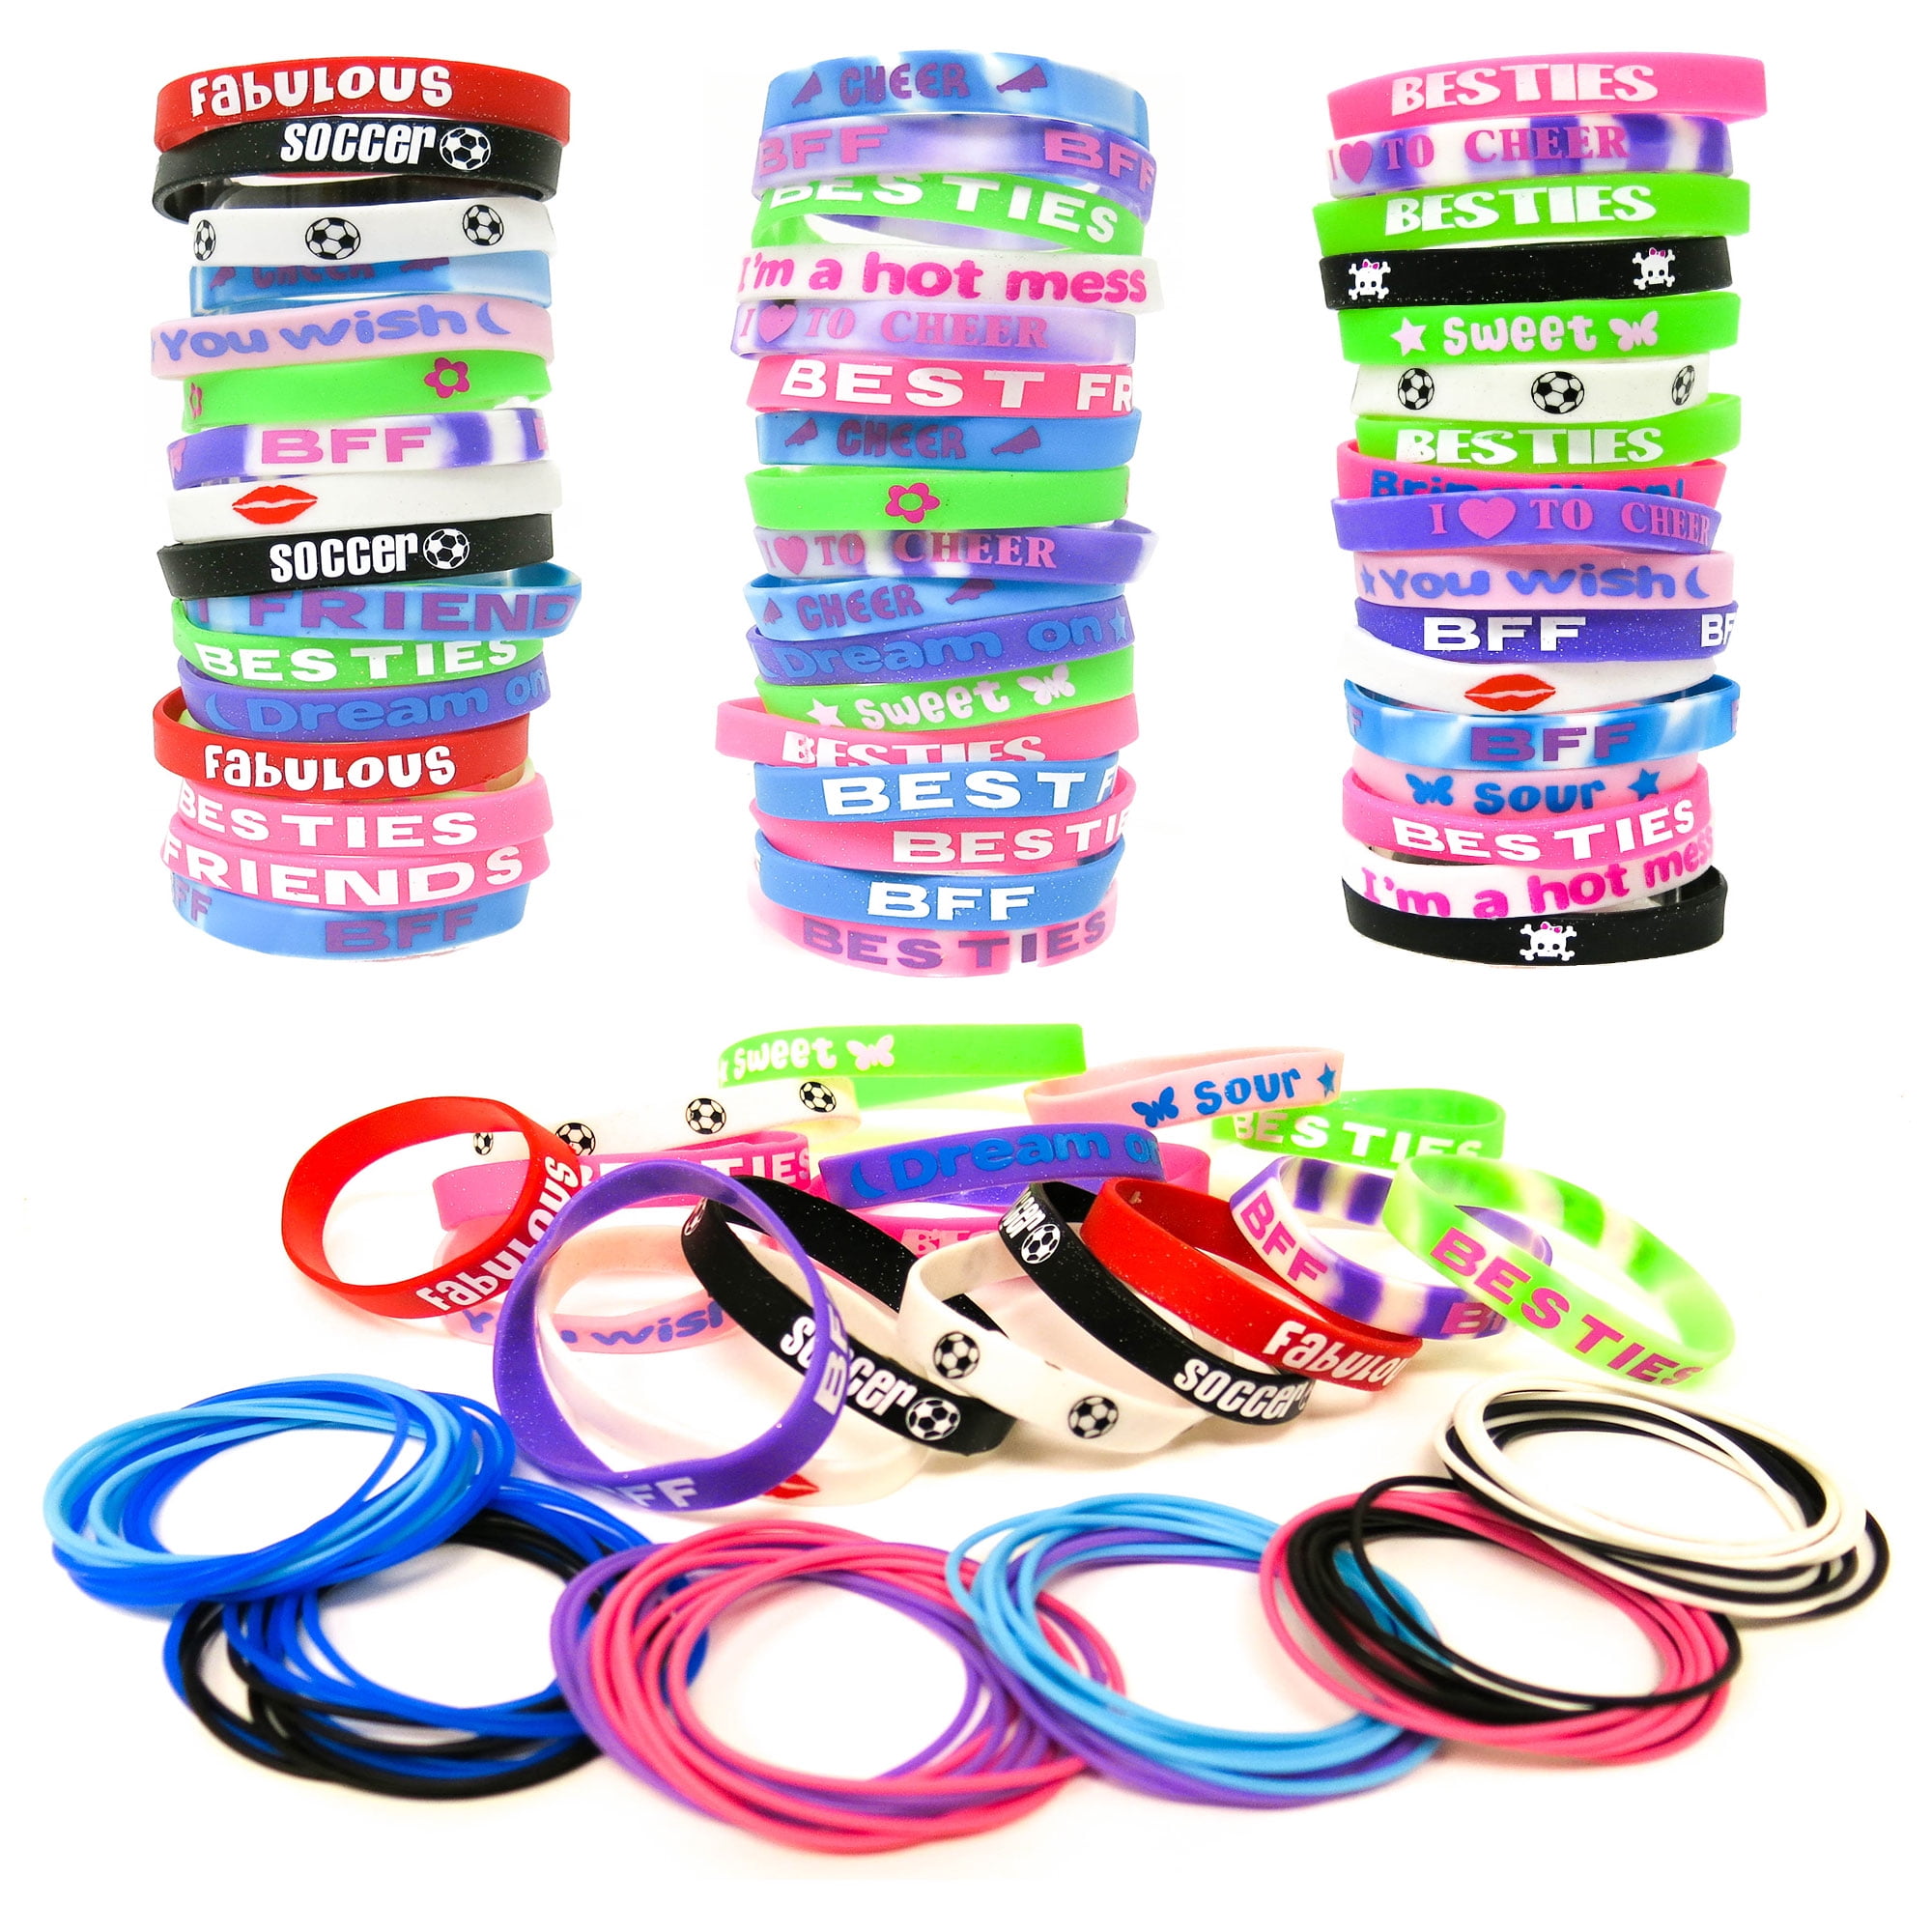 144 Bracelets Party Favors for Kids Boys Girls - Bulk Silicone Wristbands a...